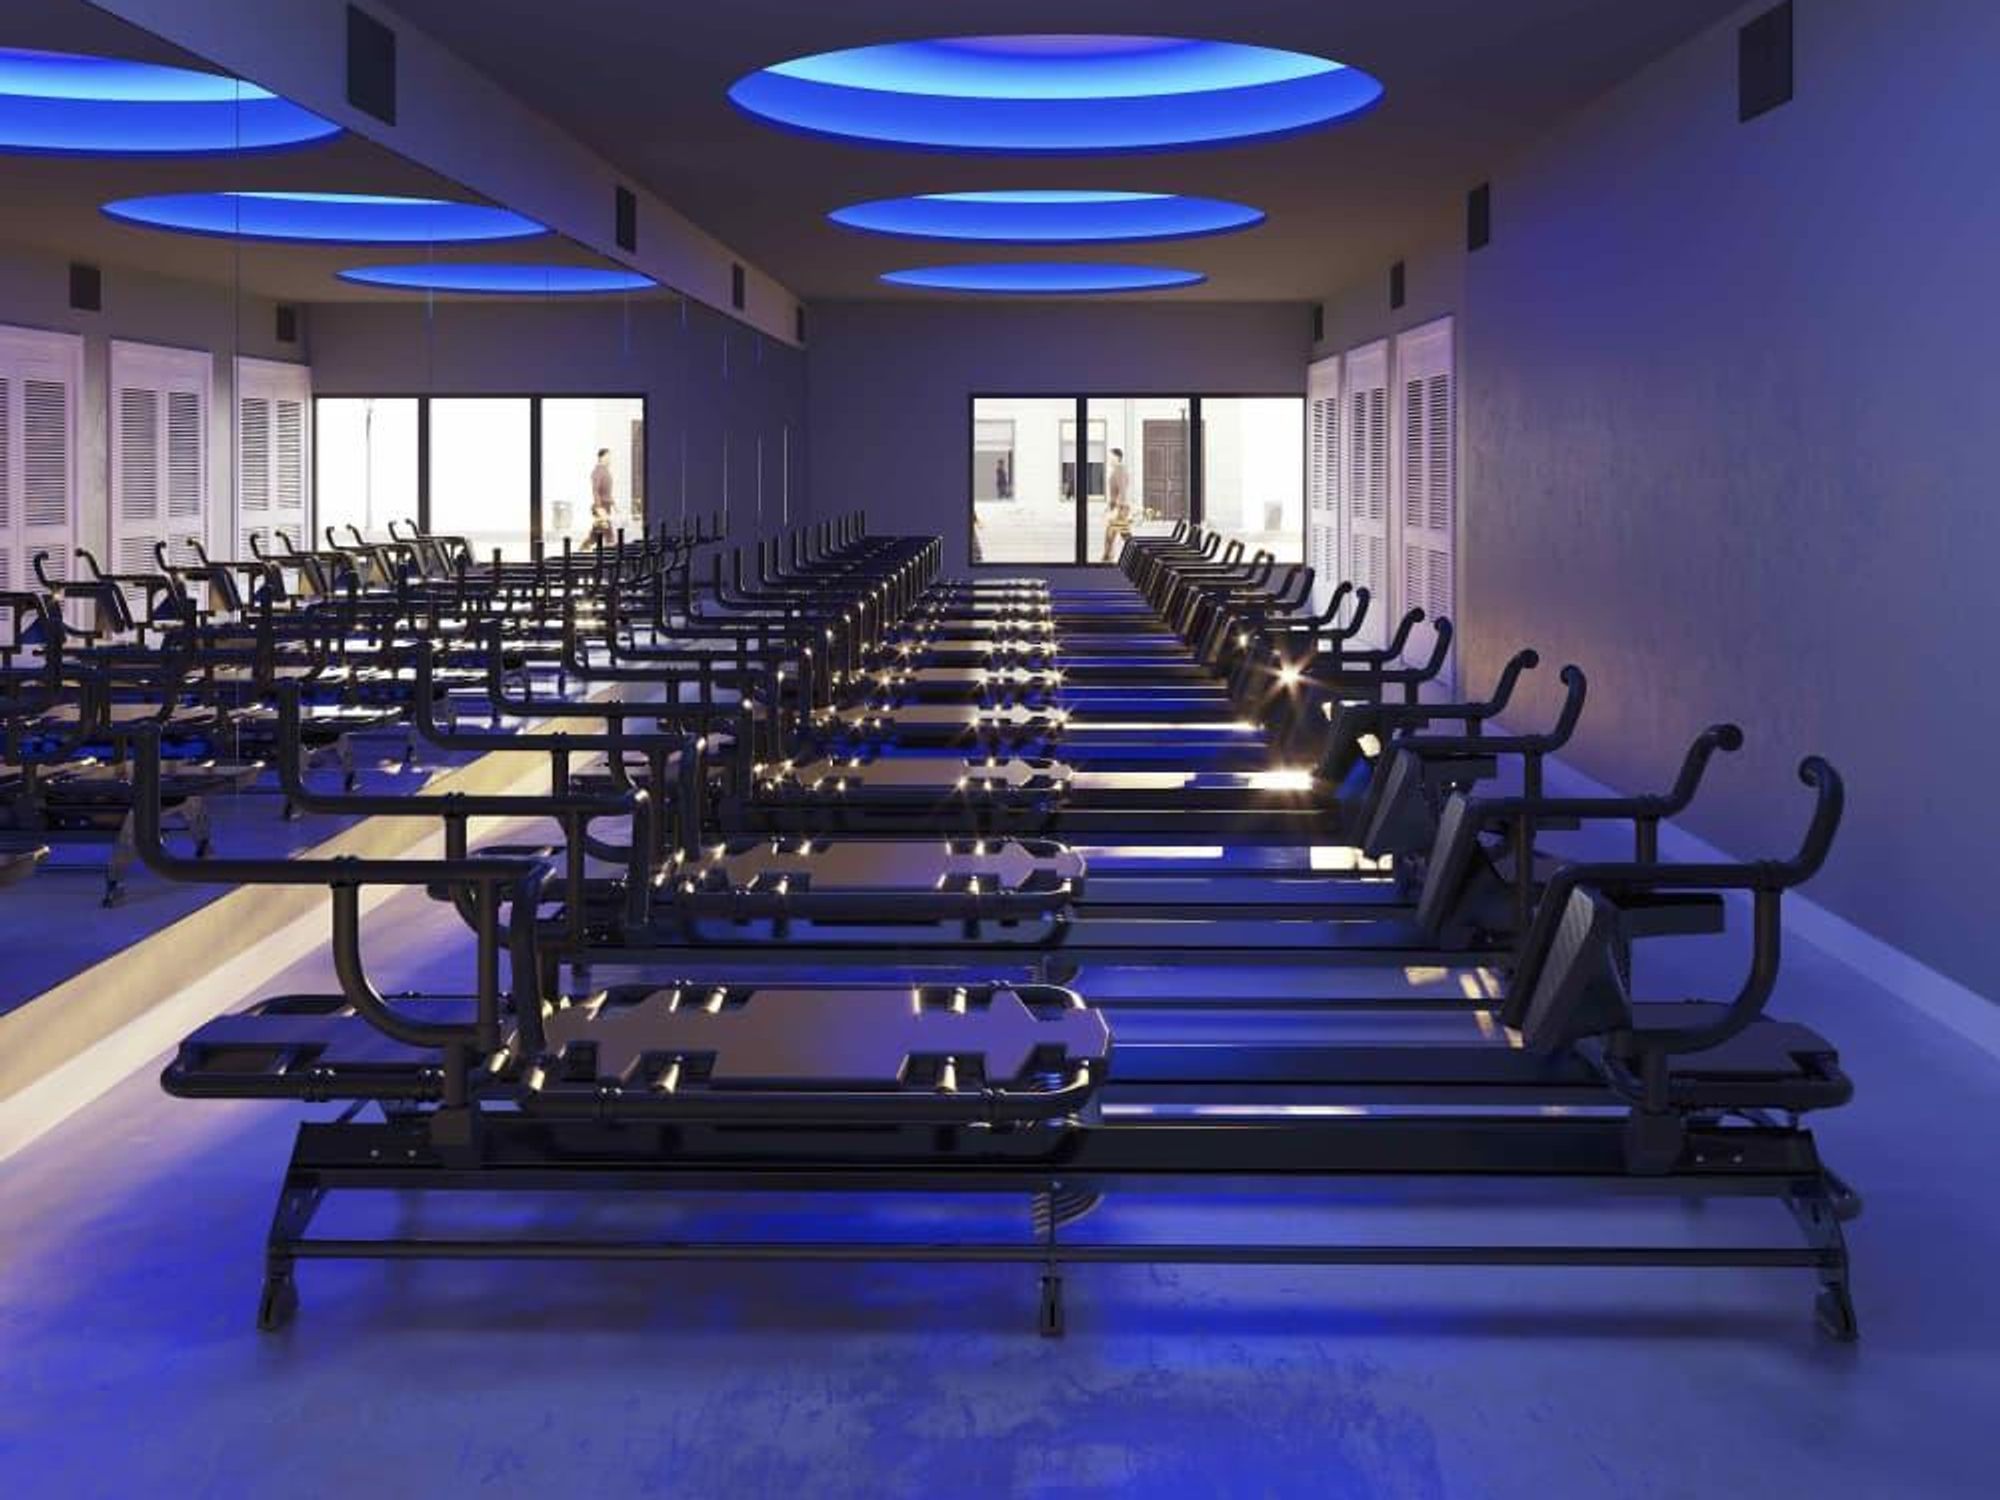 New fitness studio with late-night classes shimmies into spot near